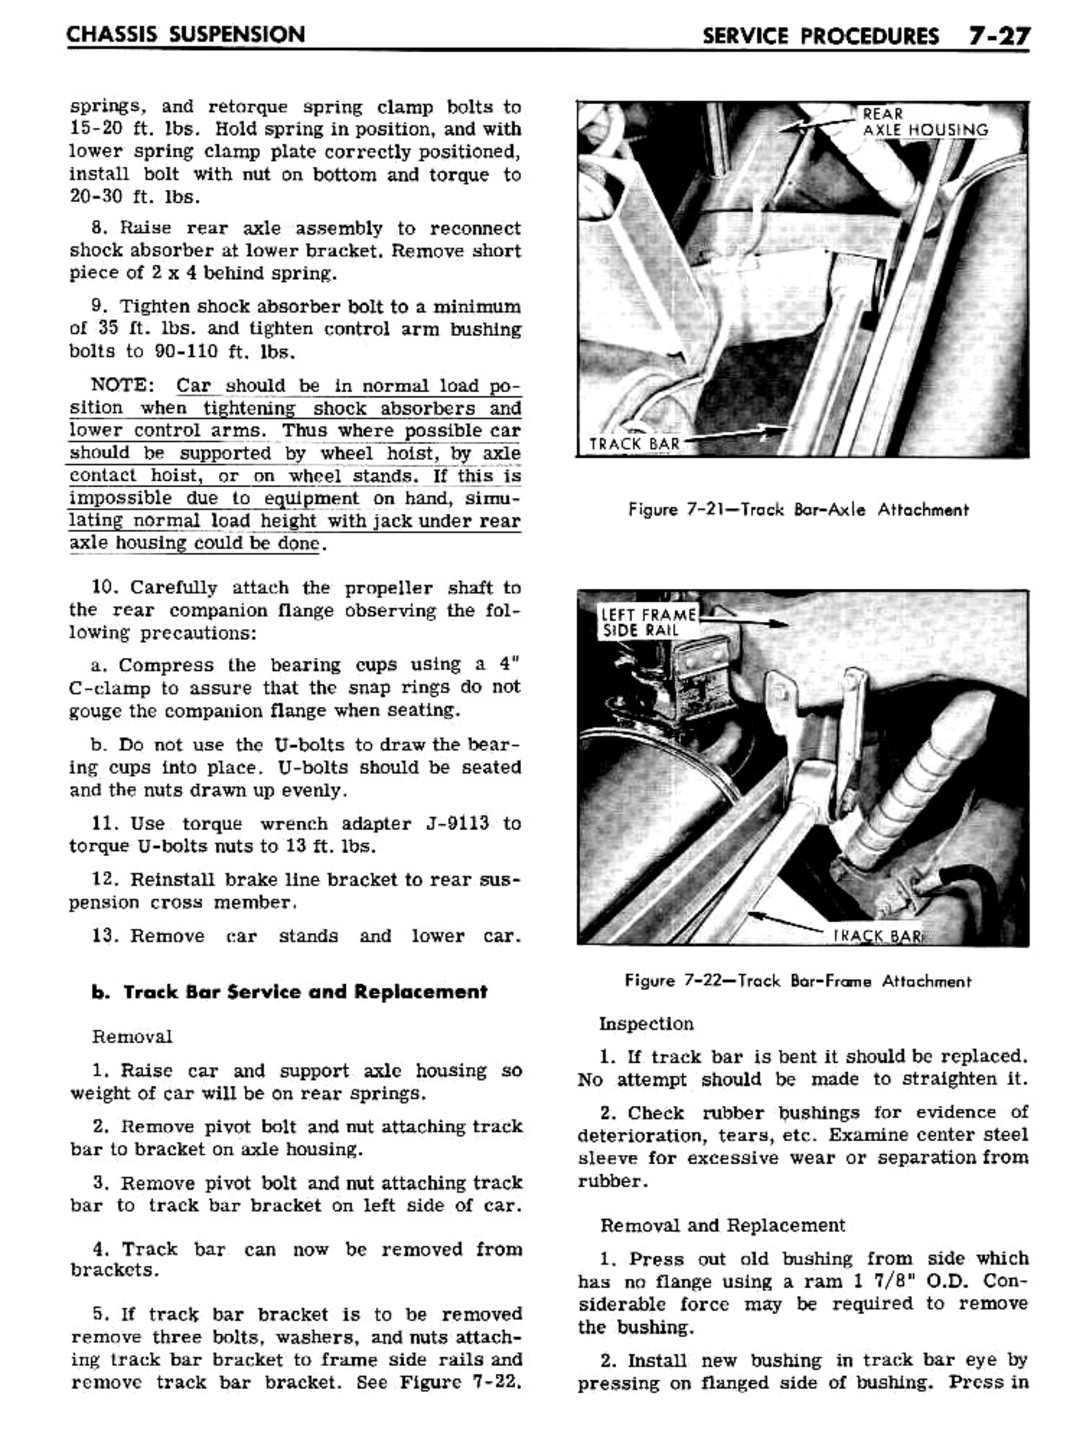 n_07 1961 Buick Shop Manual - Chassis Suspension-027-027.jpg